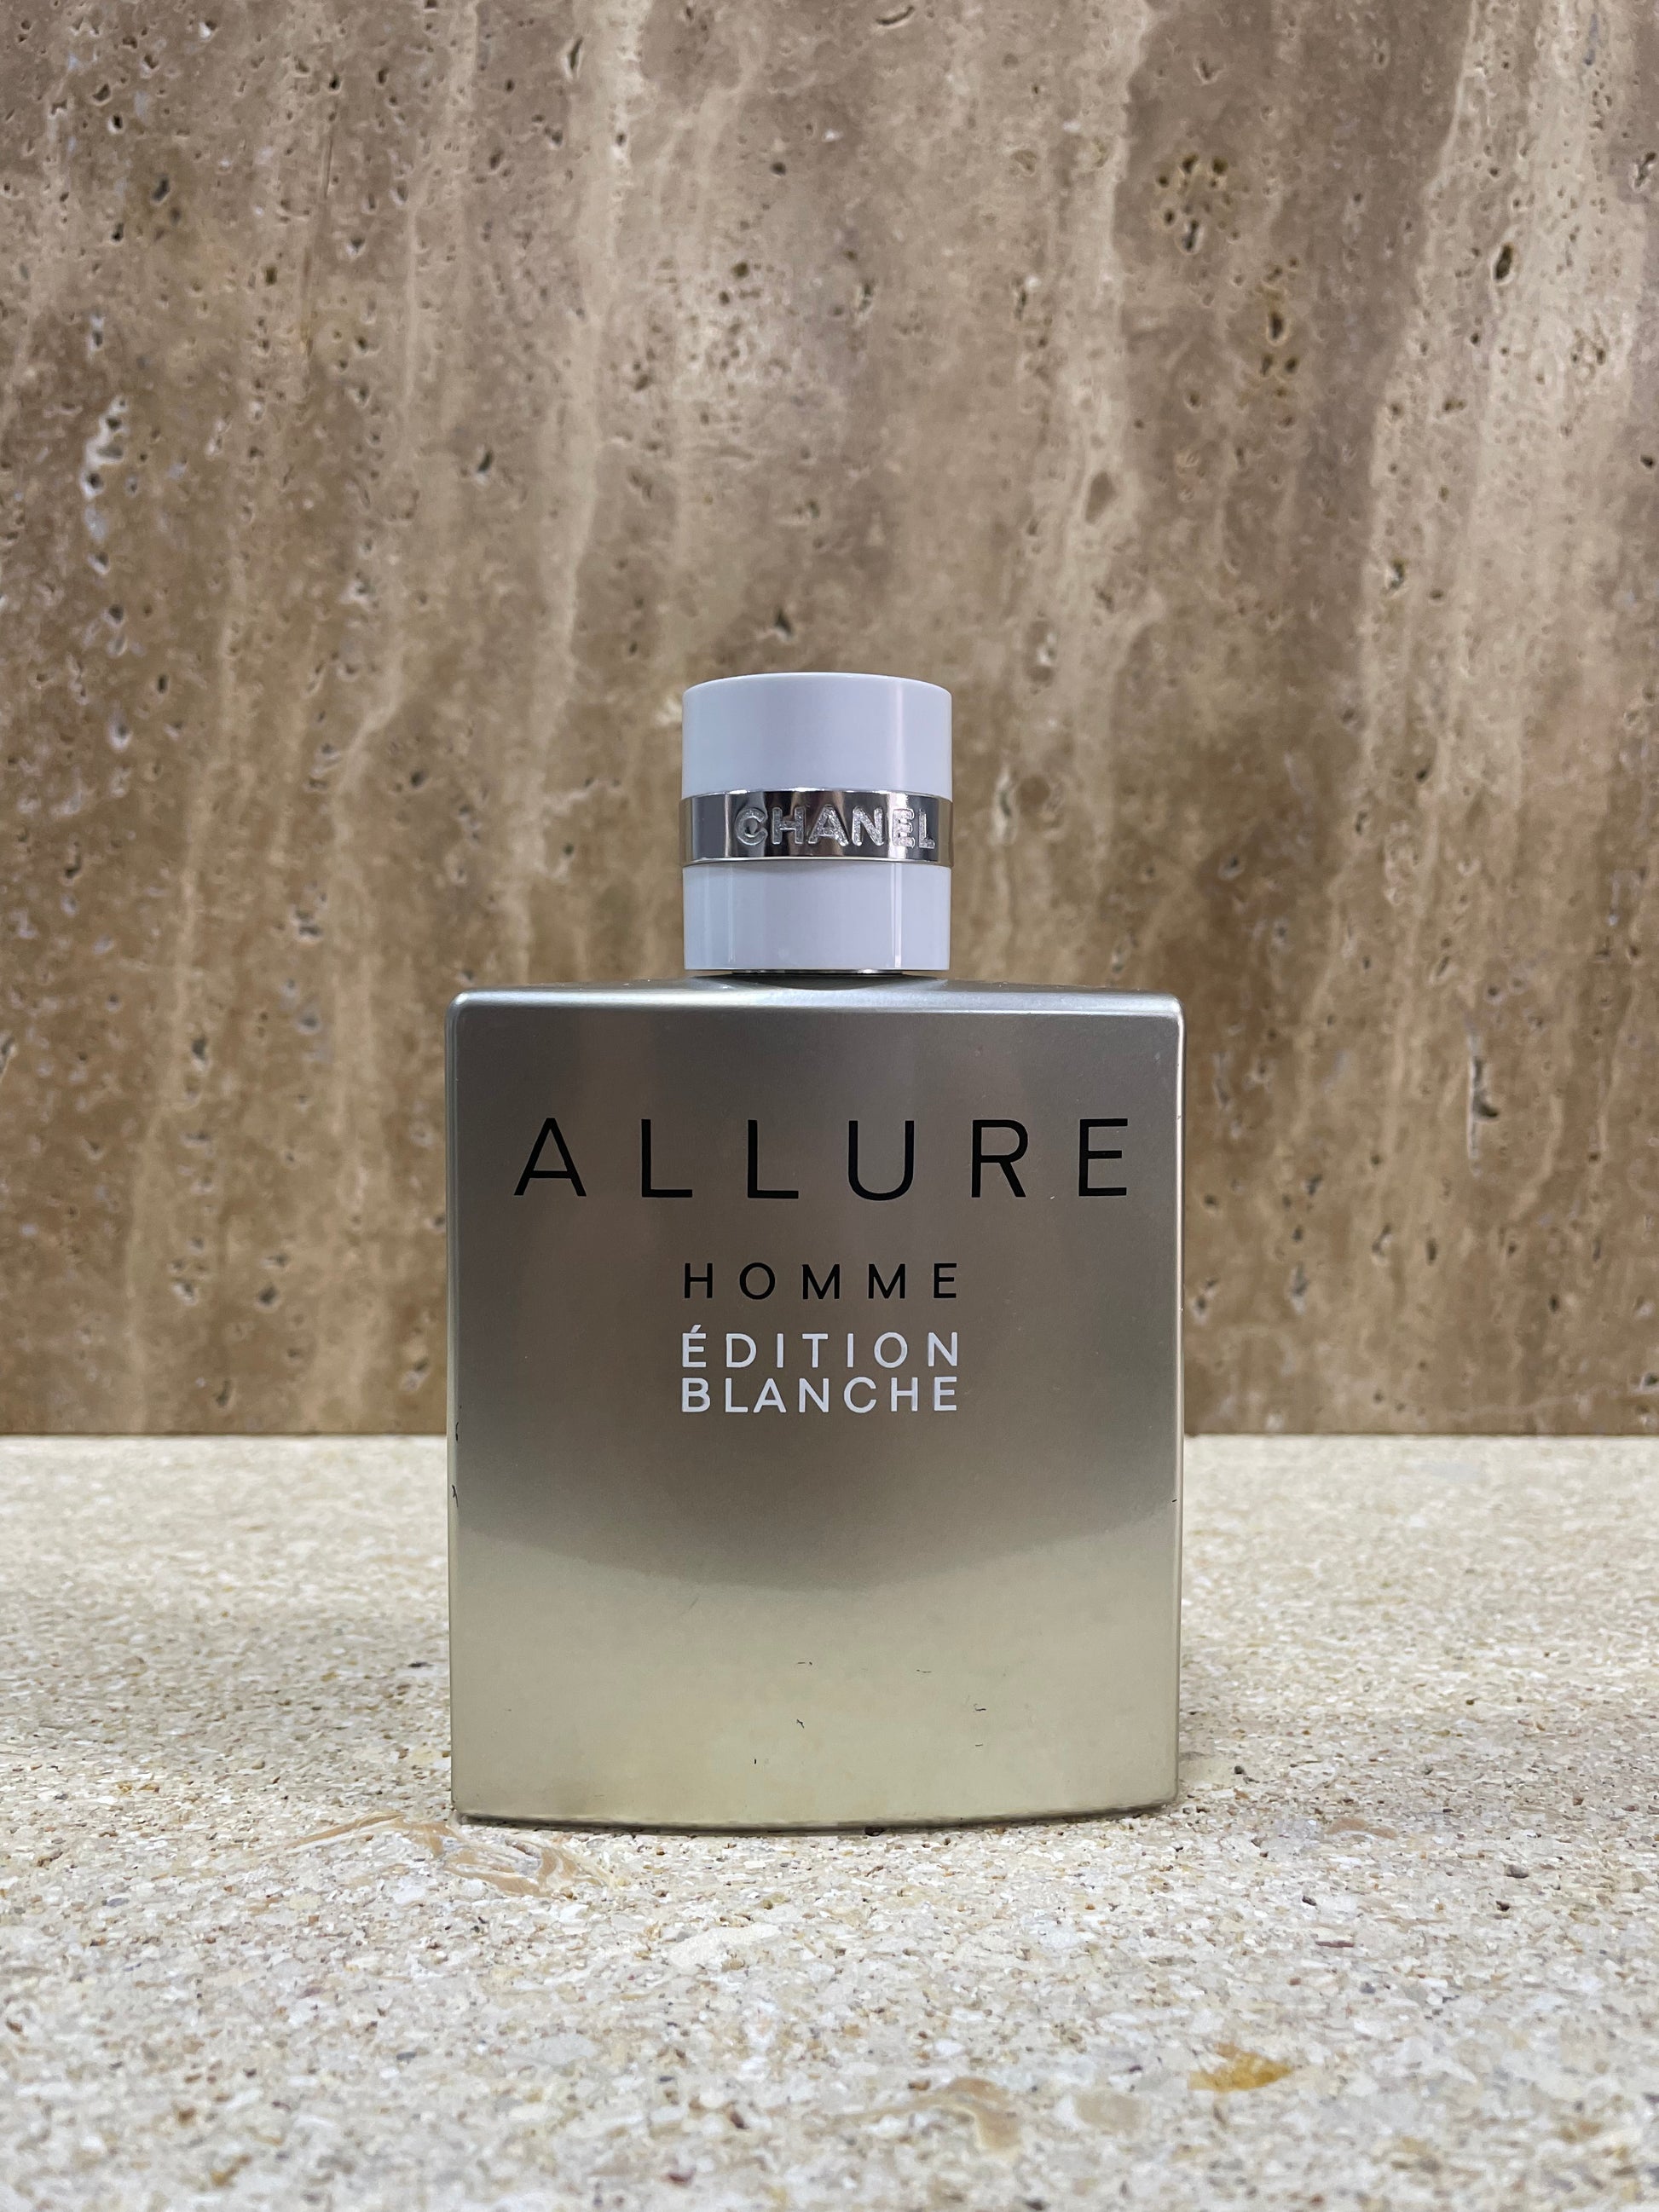 Allure Homme Blanche by Chanel for Men